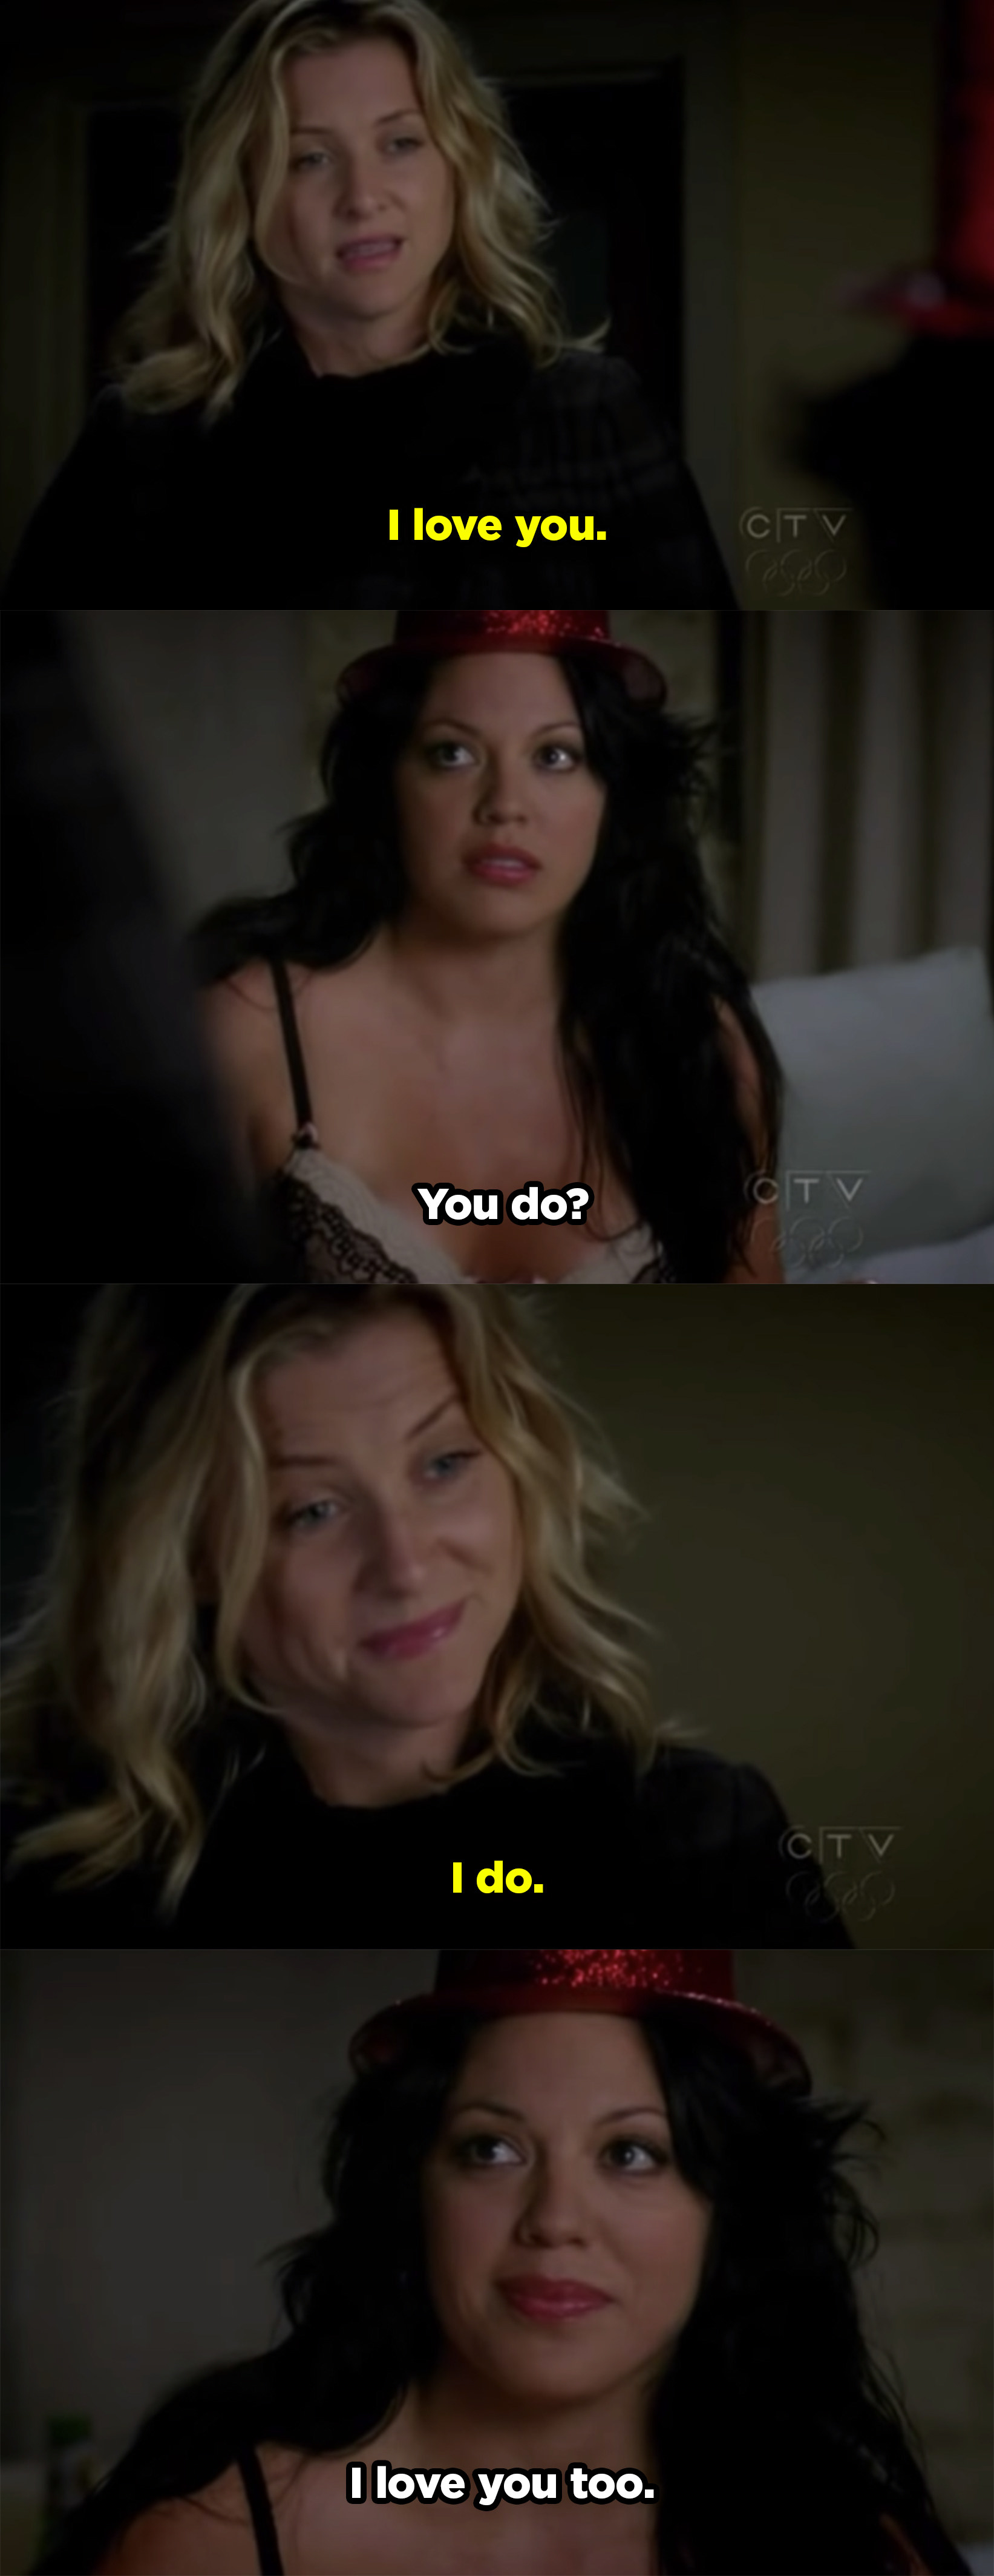 Arizona finally tells Callie she loves her and Callie responds, &quot;you do?&quot; And then she says she loves her too. 